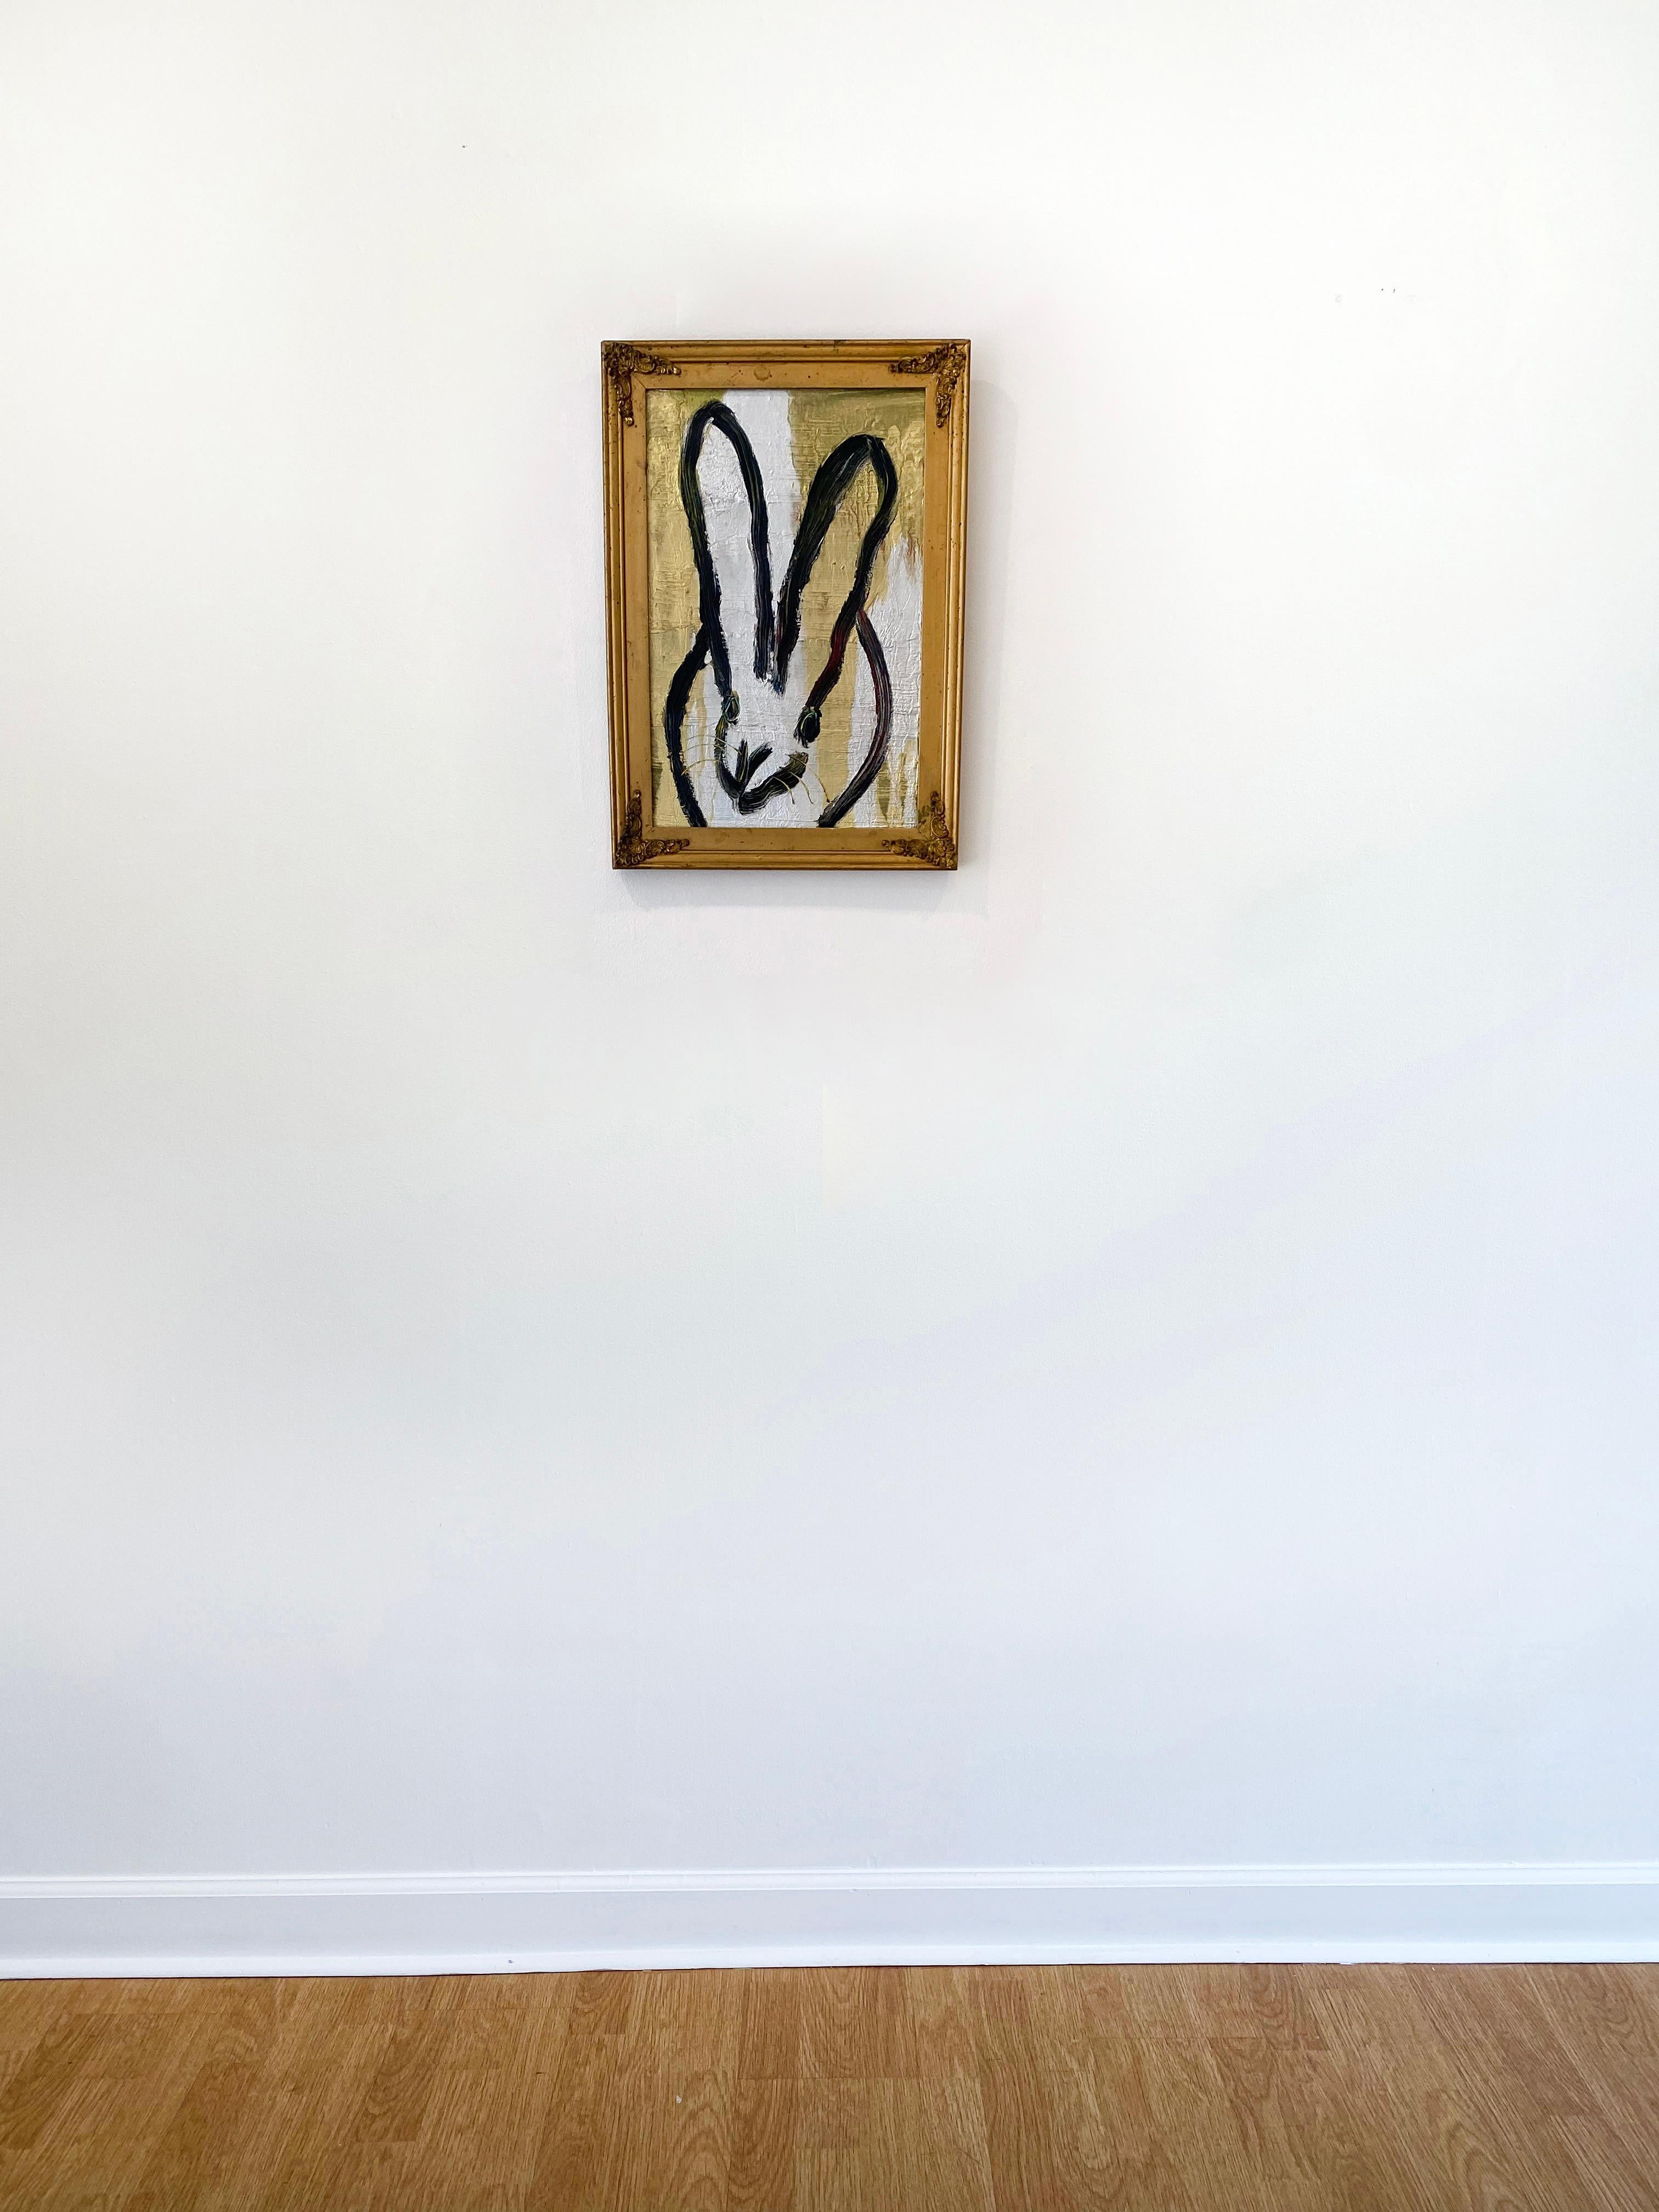 'Harold' by Hunt Slonem, 2021. Oil on wood, 15 x 10 in. Framed size is 18 x 13 in. This painting features Slonem's signature bunny outlined in black on a metallic gold and silver background. This expressive bunny features long slender ears and a